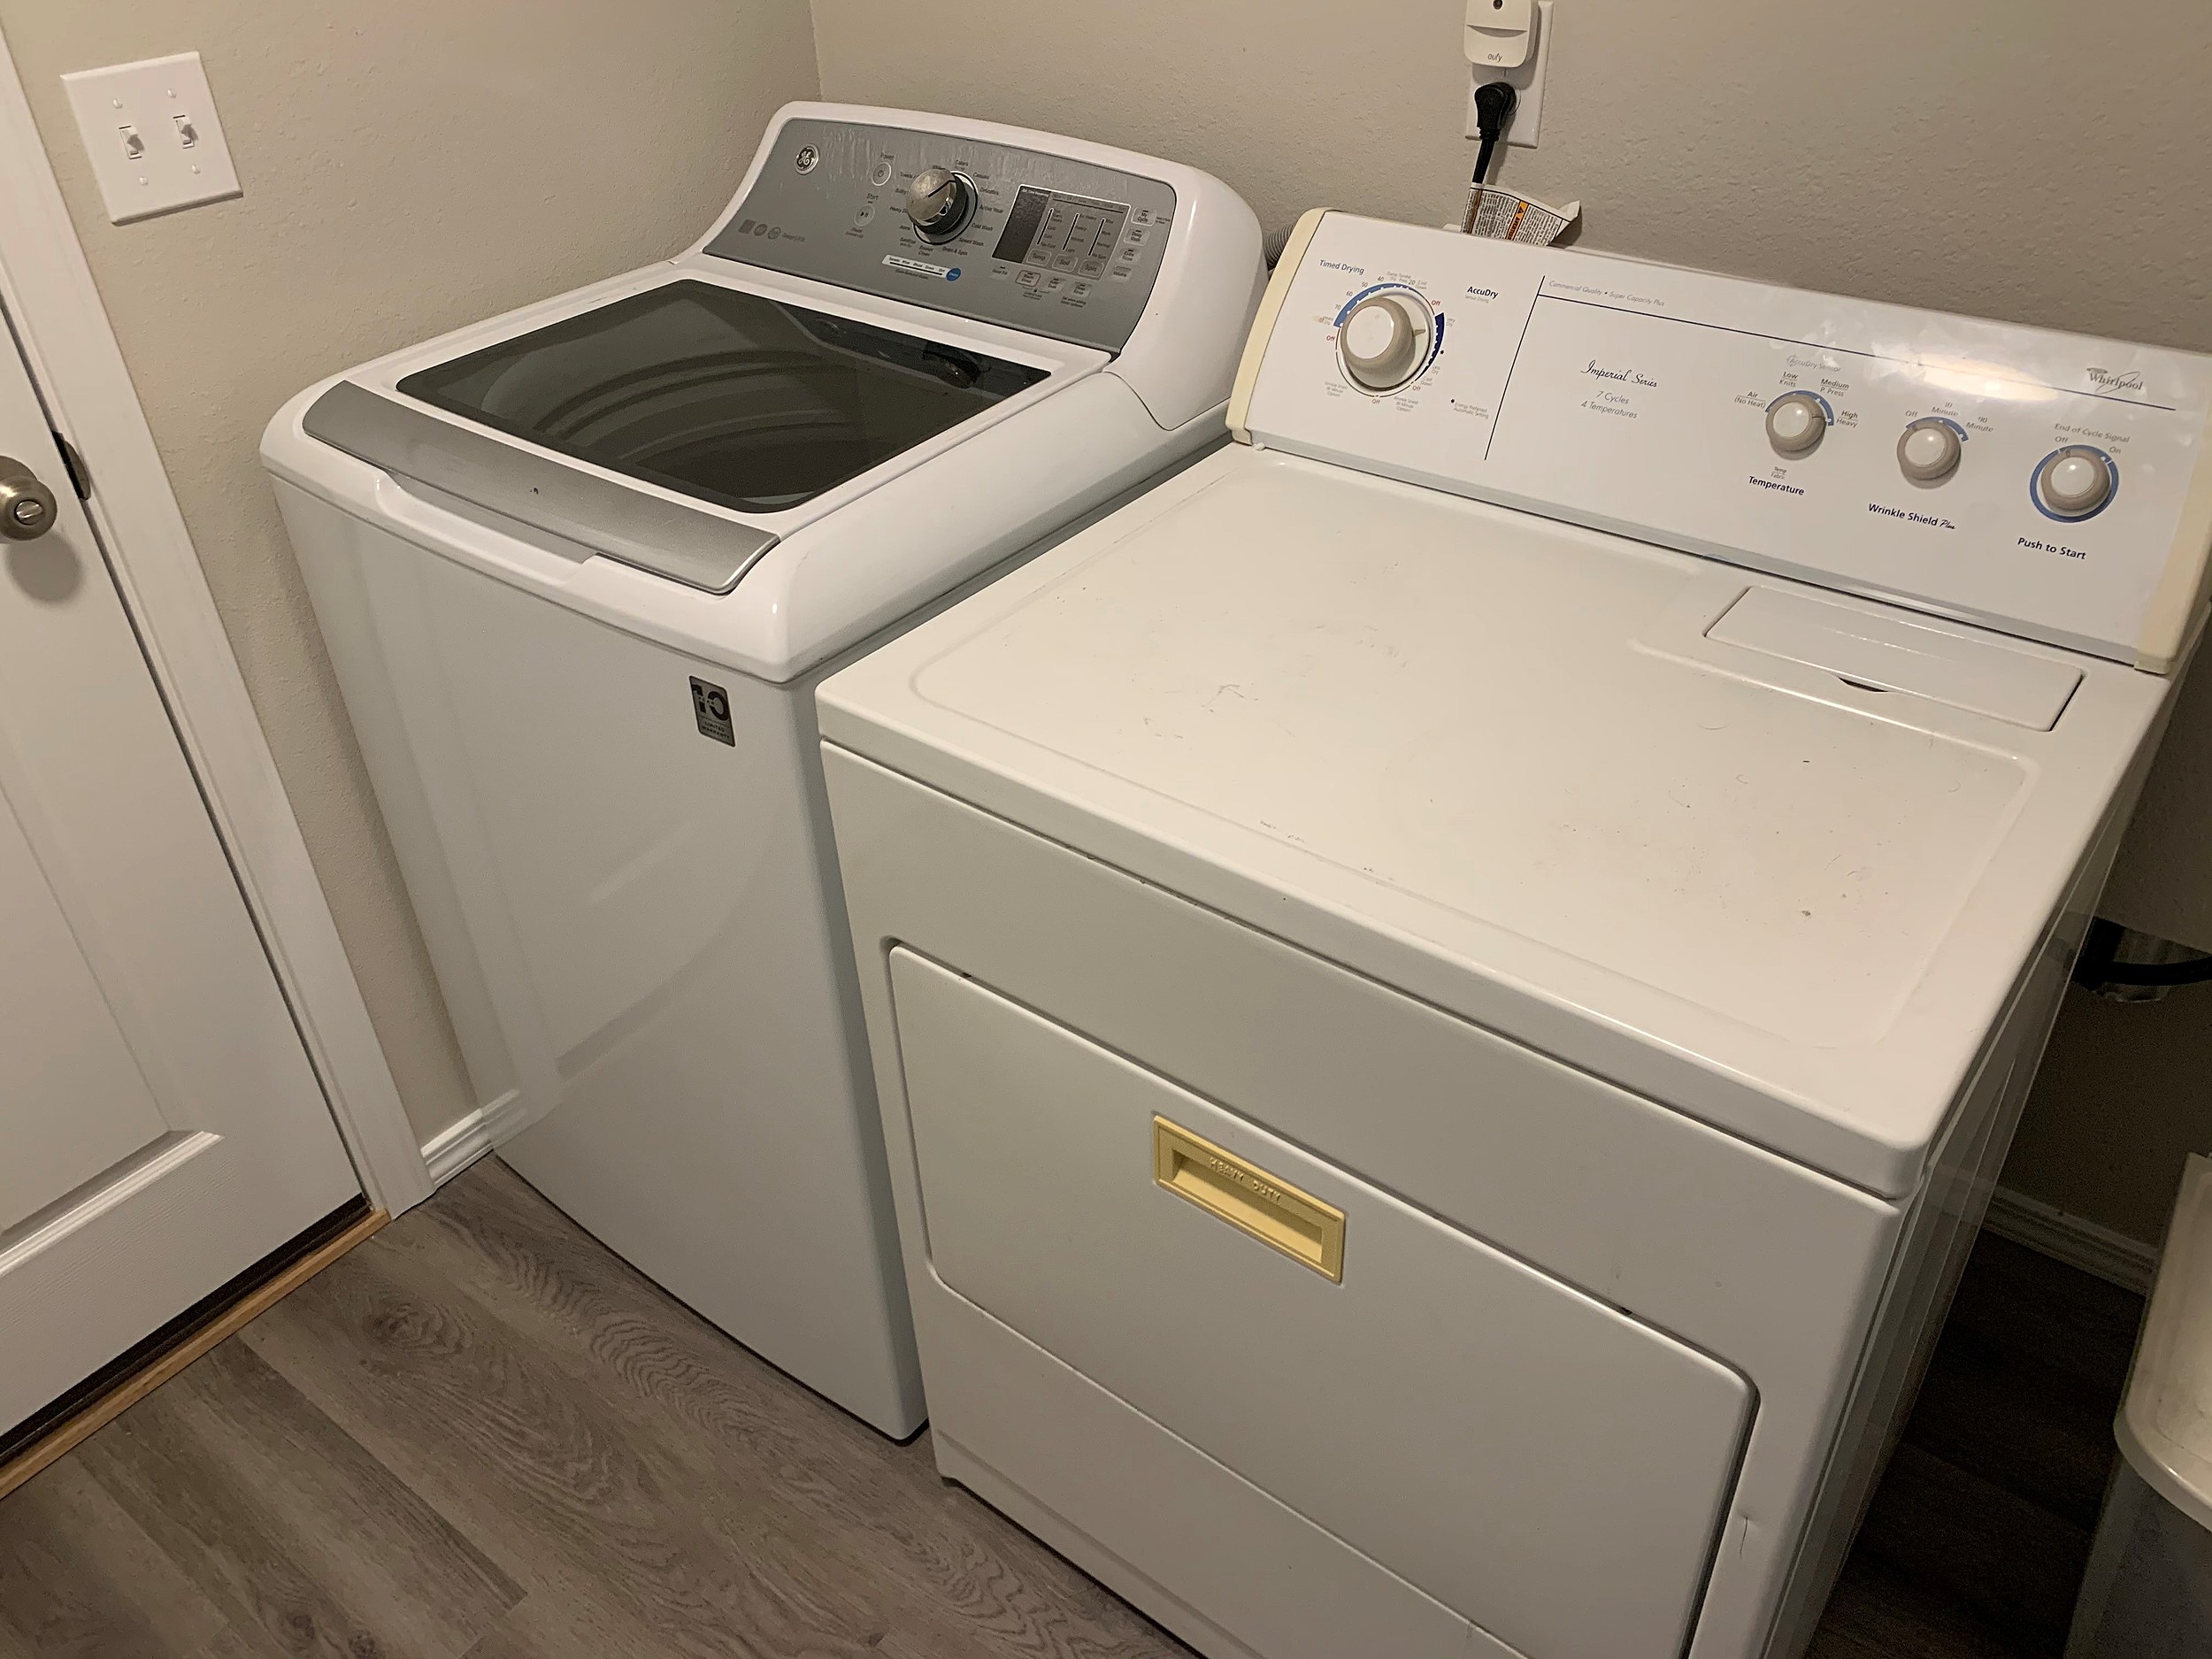 Where Can I Sell My Washer And Dryer